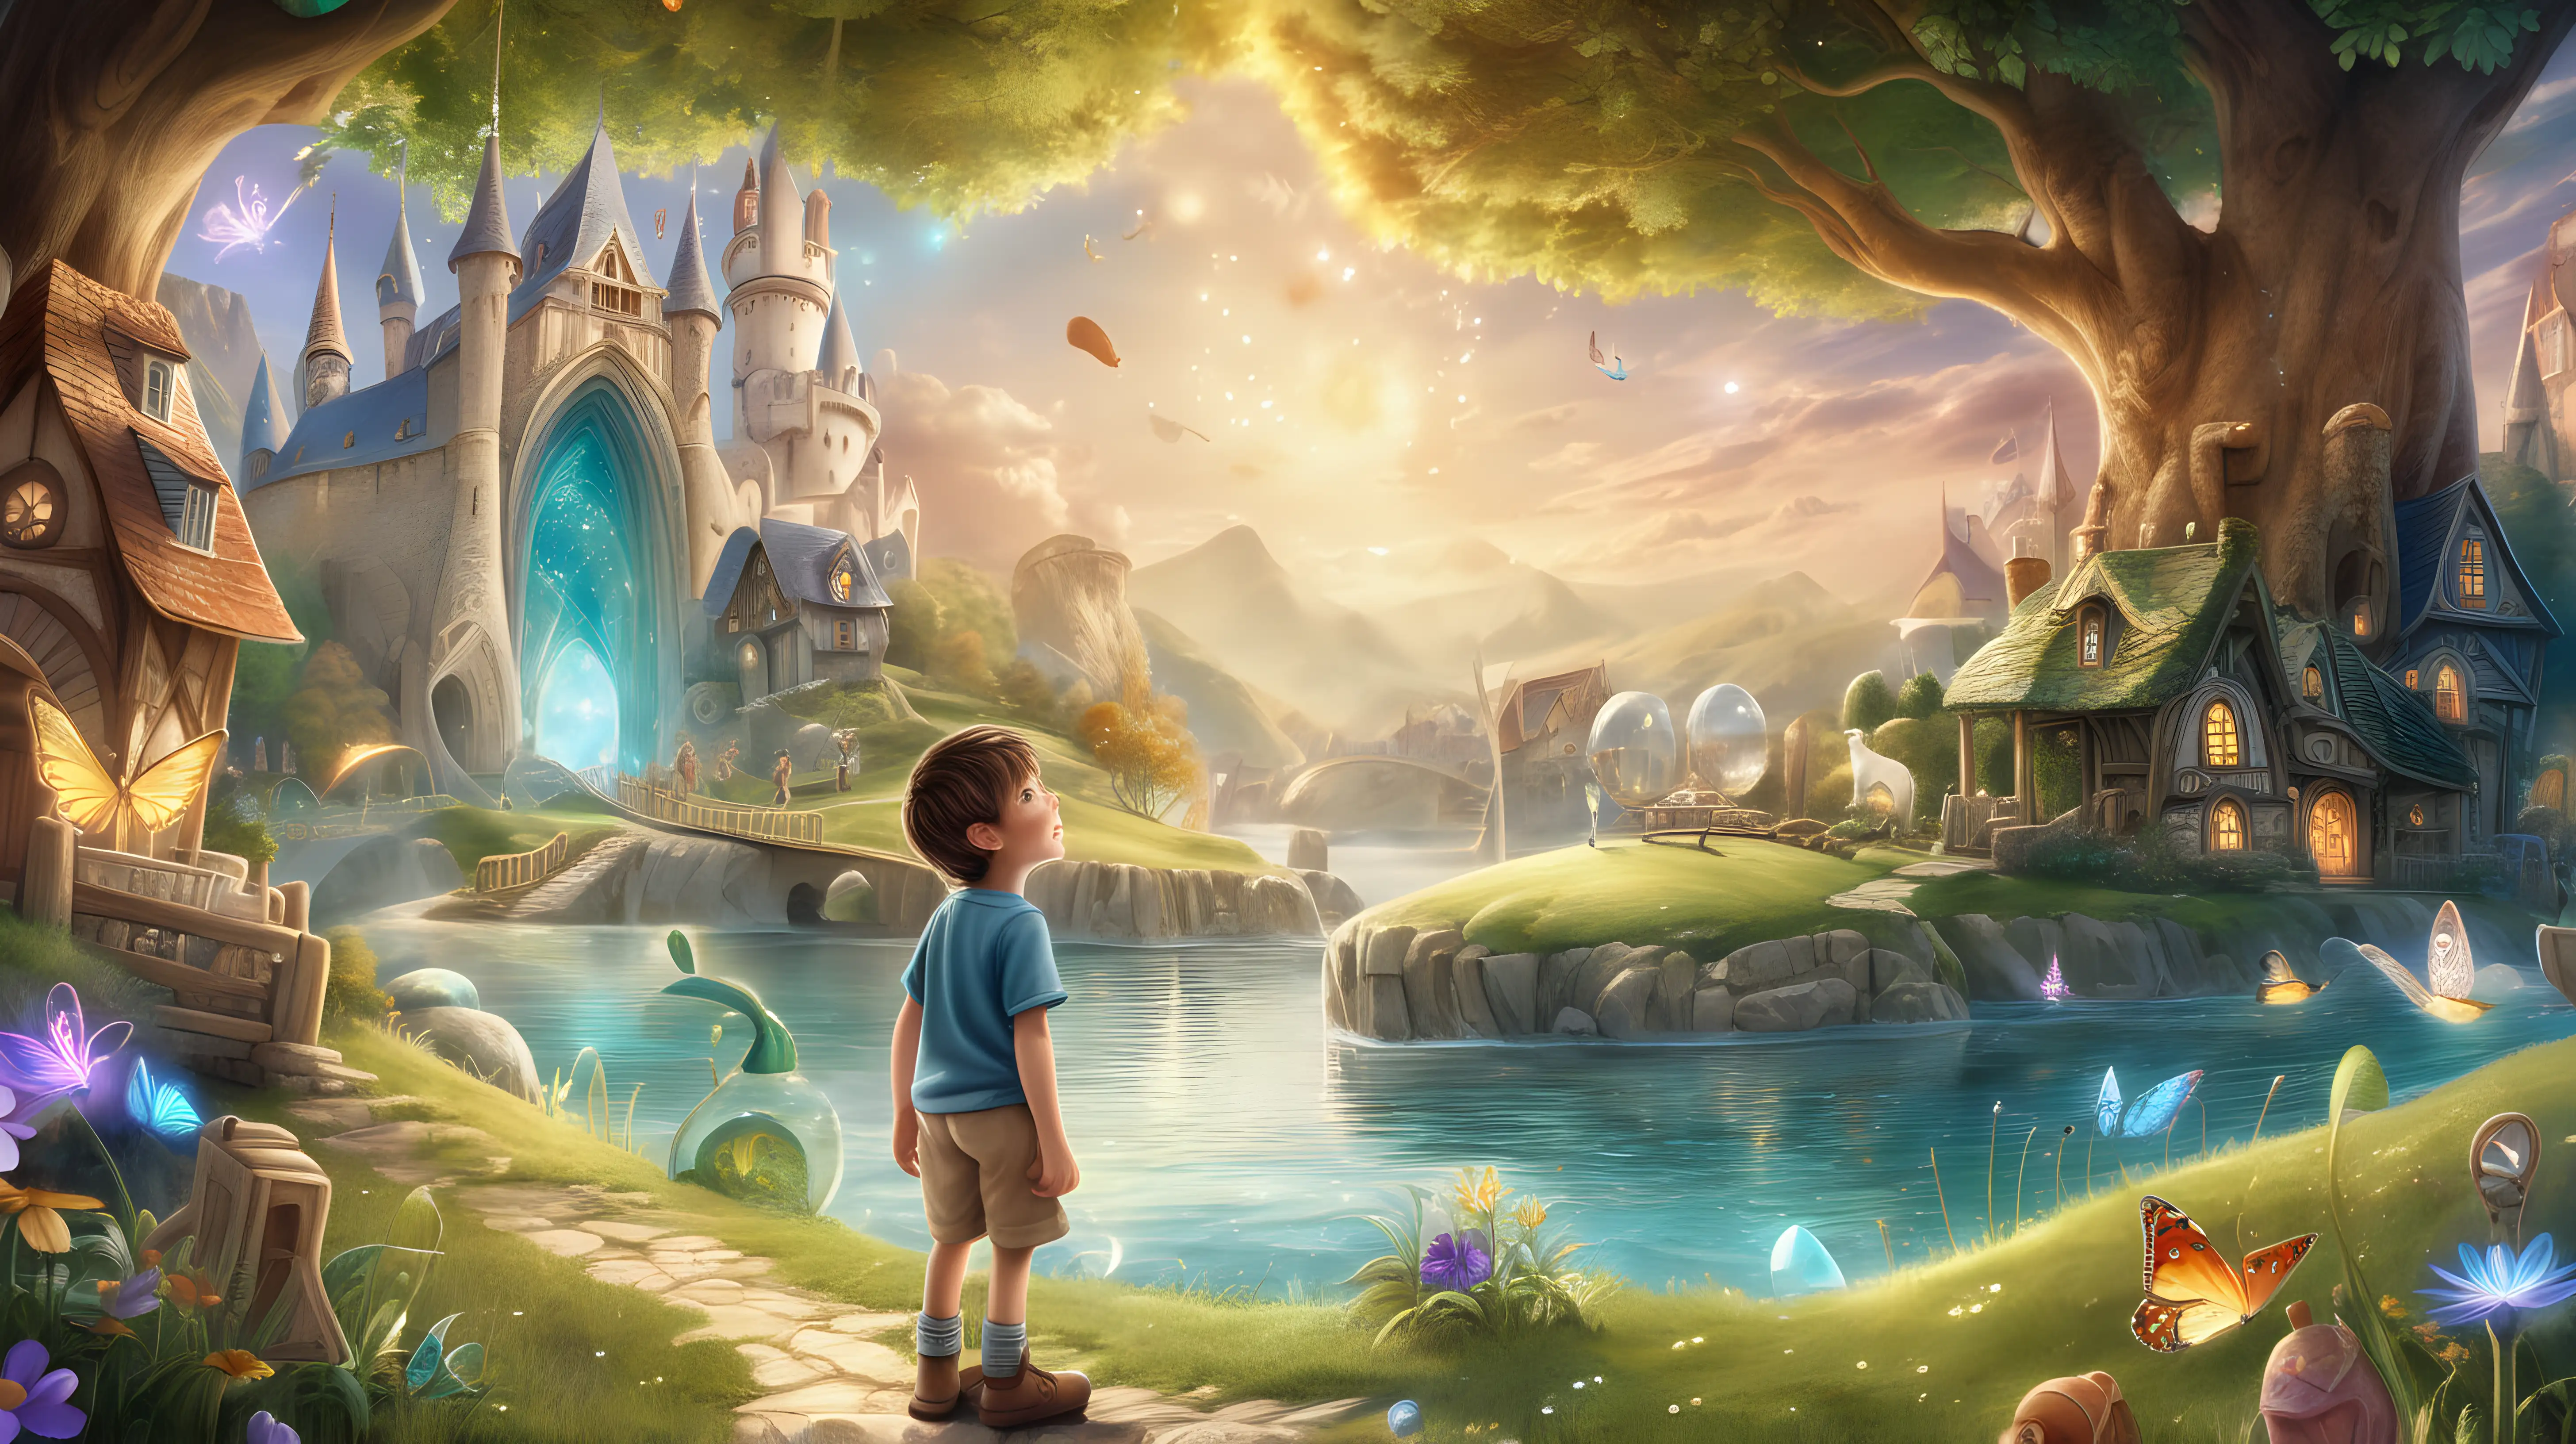 A beautiful scene of a charming boy discovering a magical world filled with wonder.